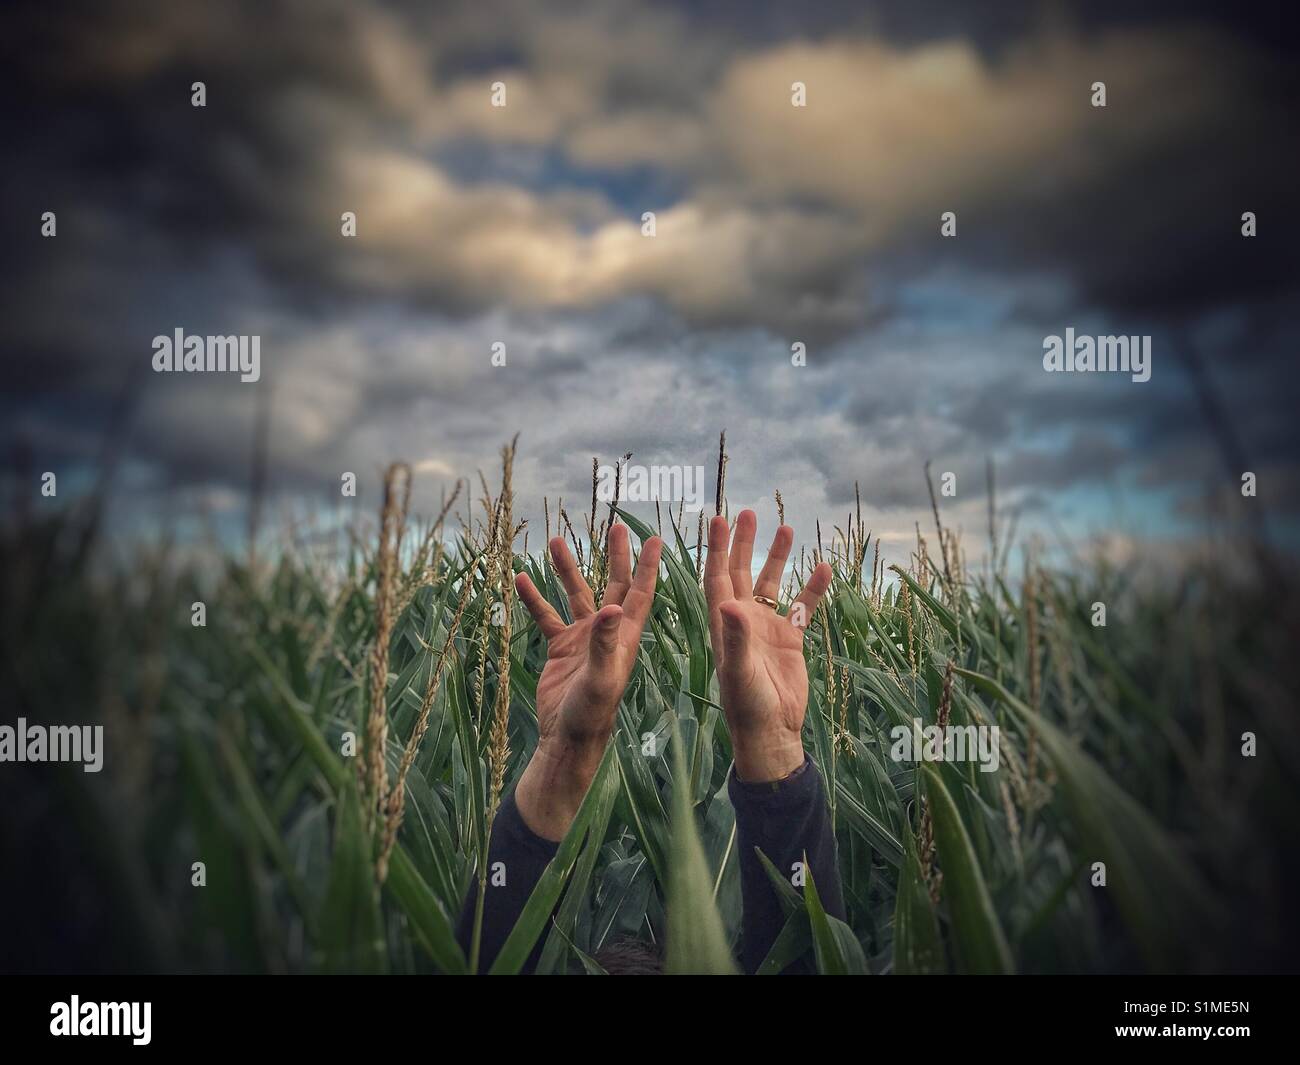 A pair of human hands reaching up skywards towards a stormy sky for help as if drowning in a field of tall maize. Stock Photo